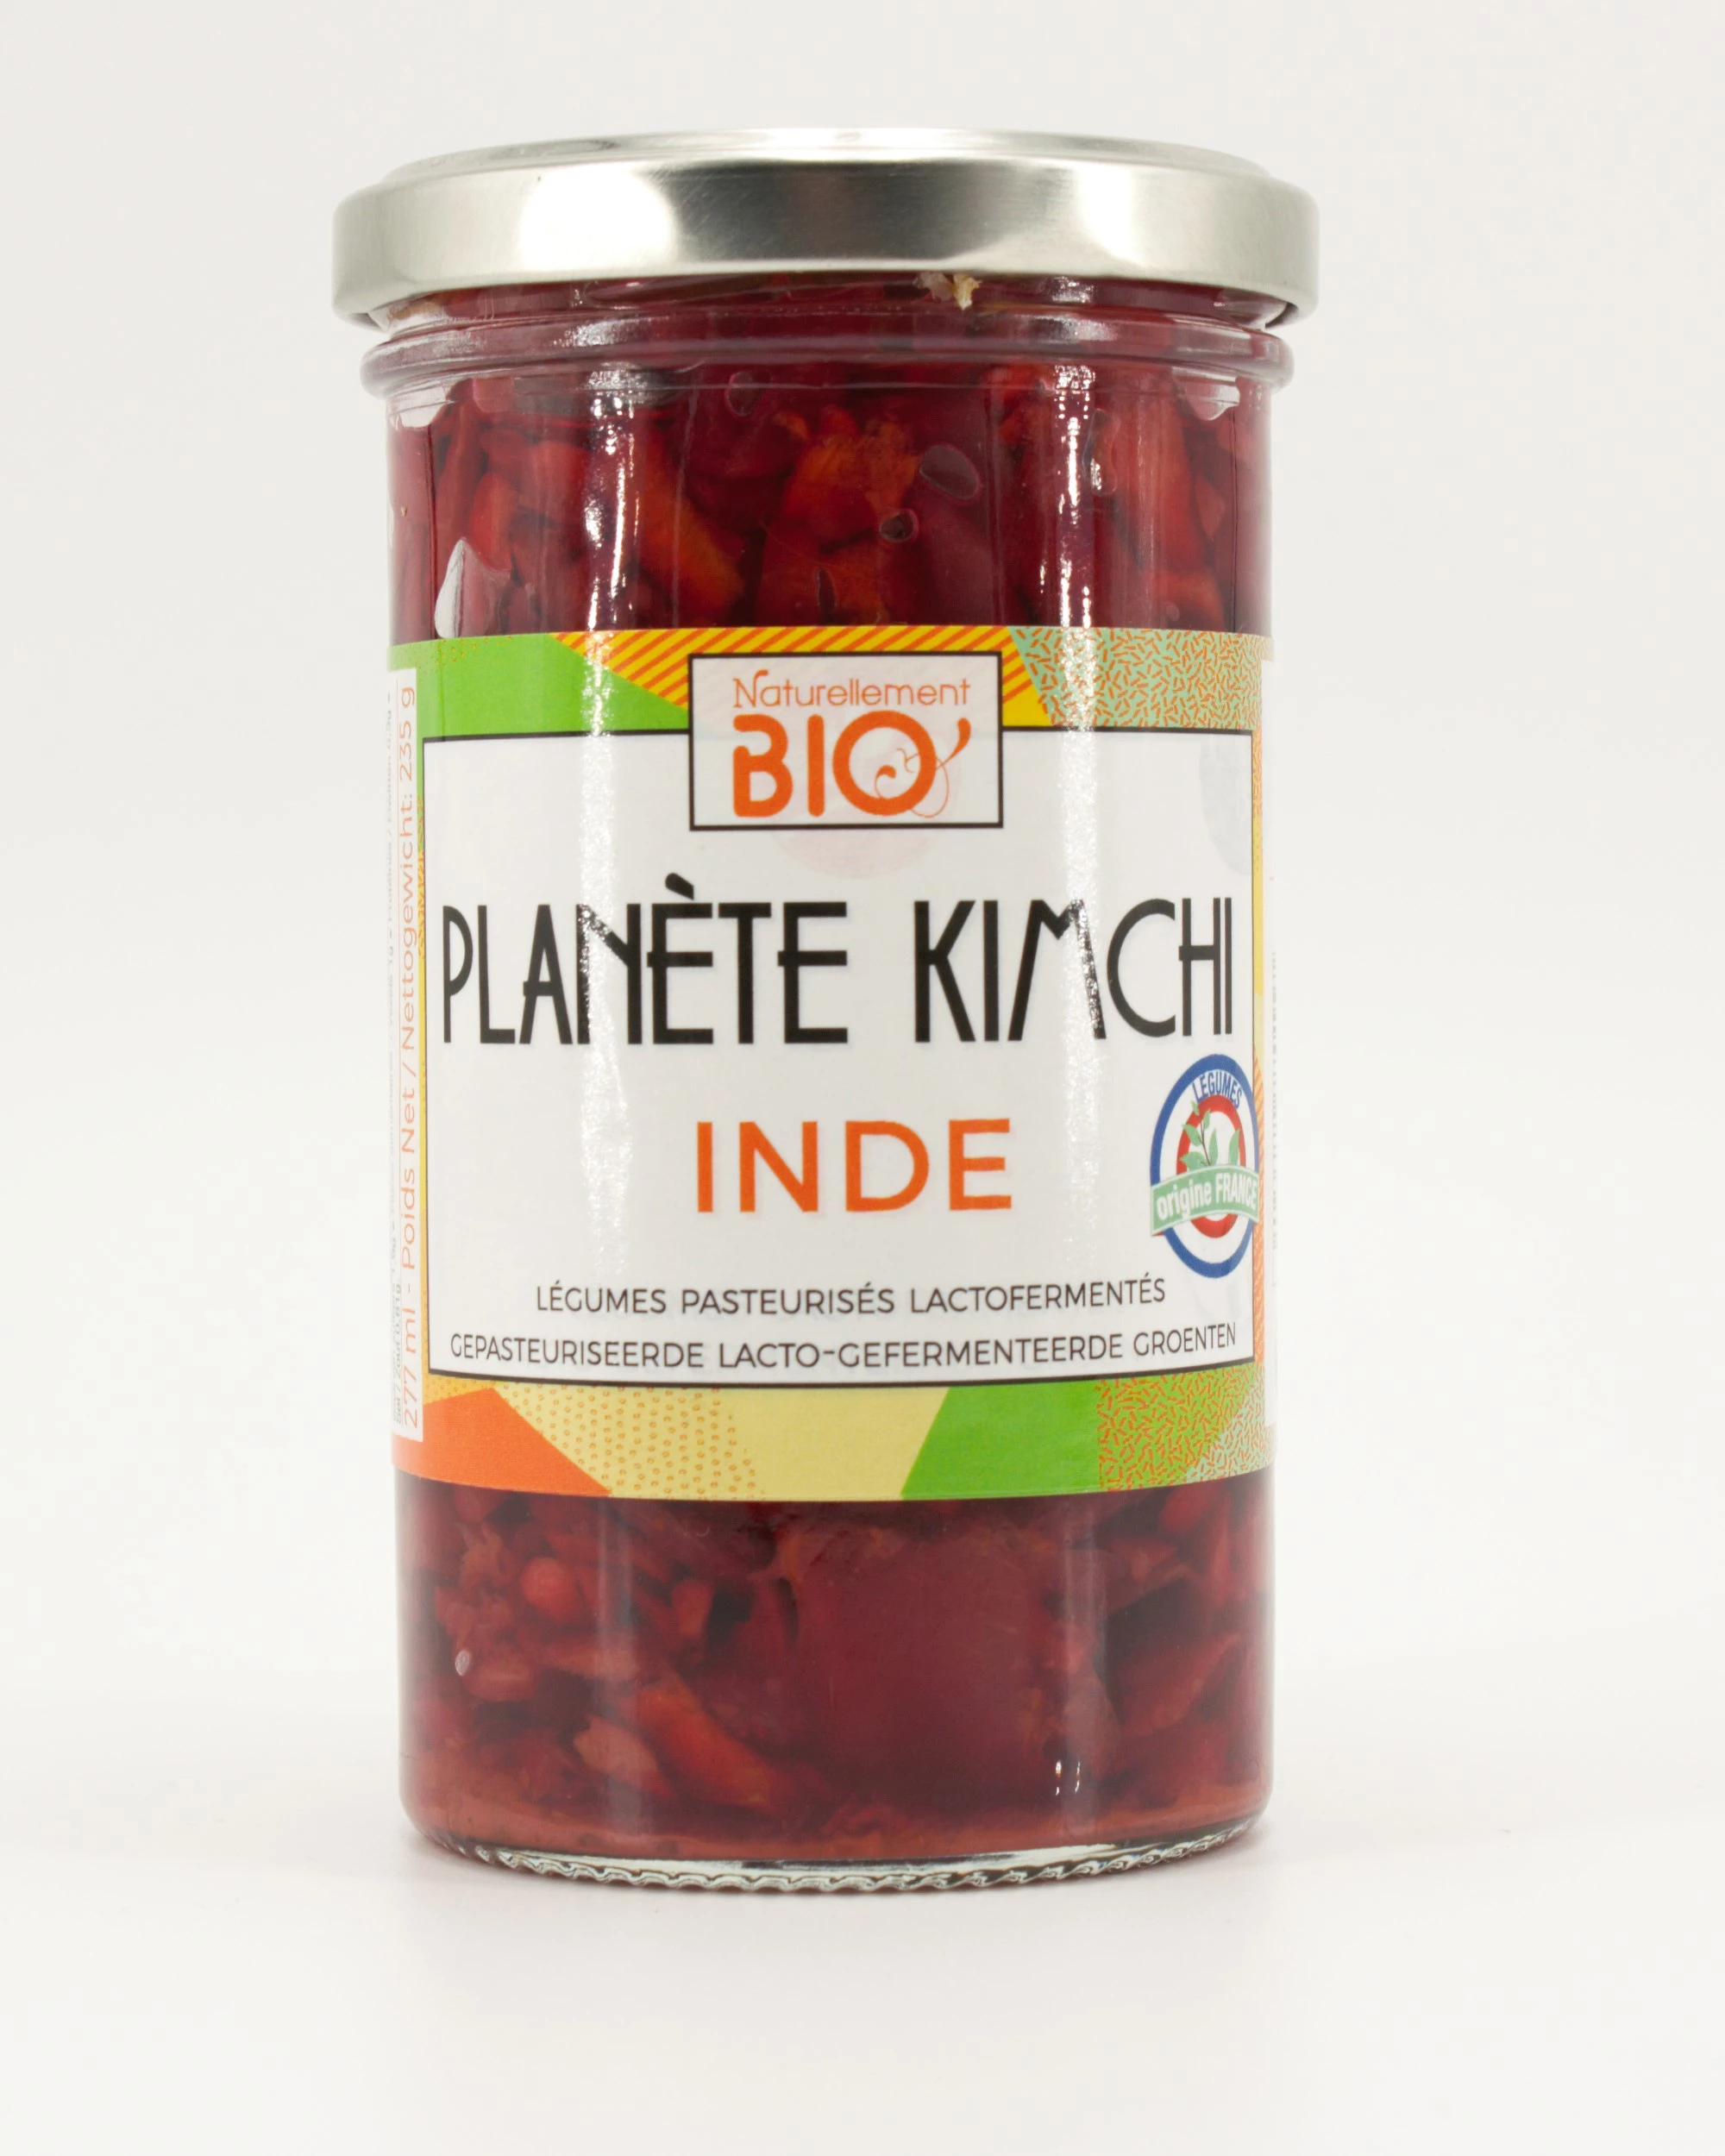 This is Bio 2500g from Planet Kinche